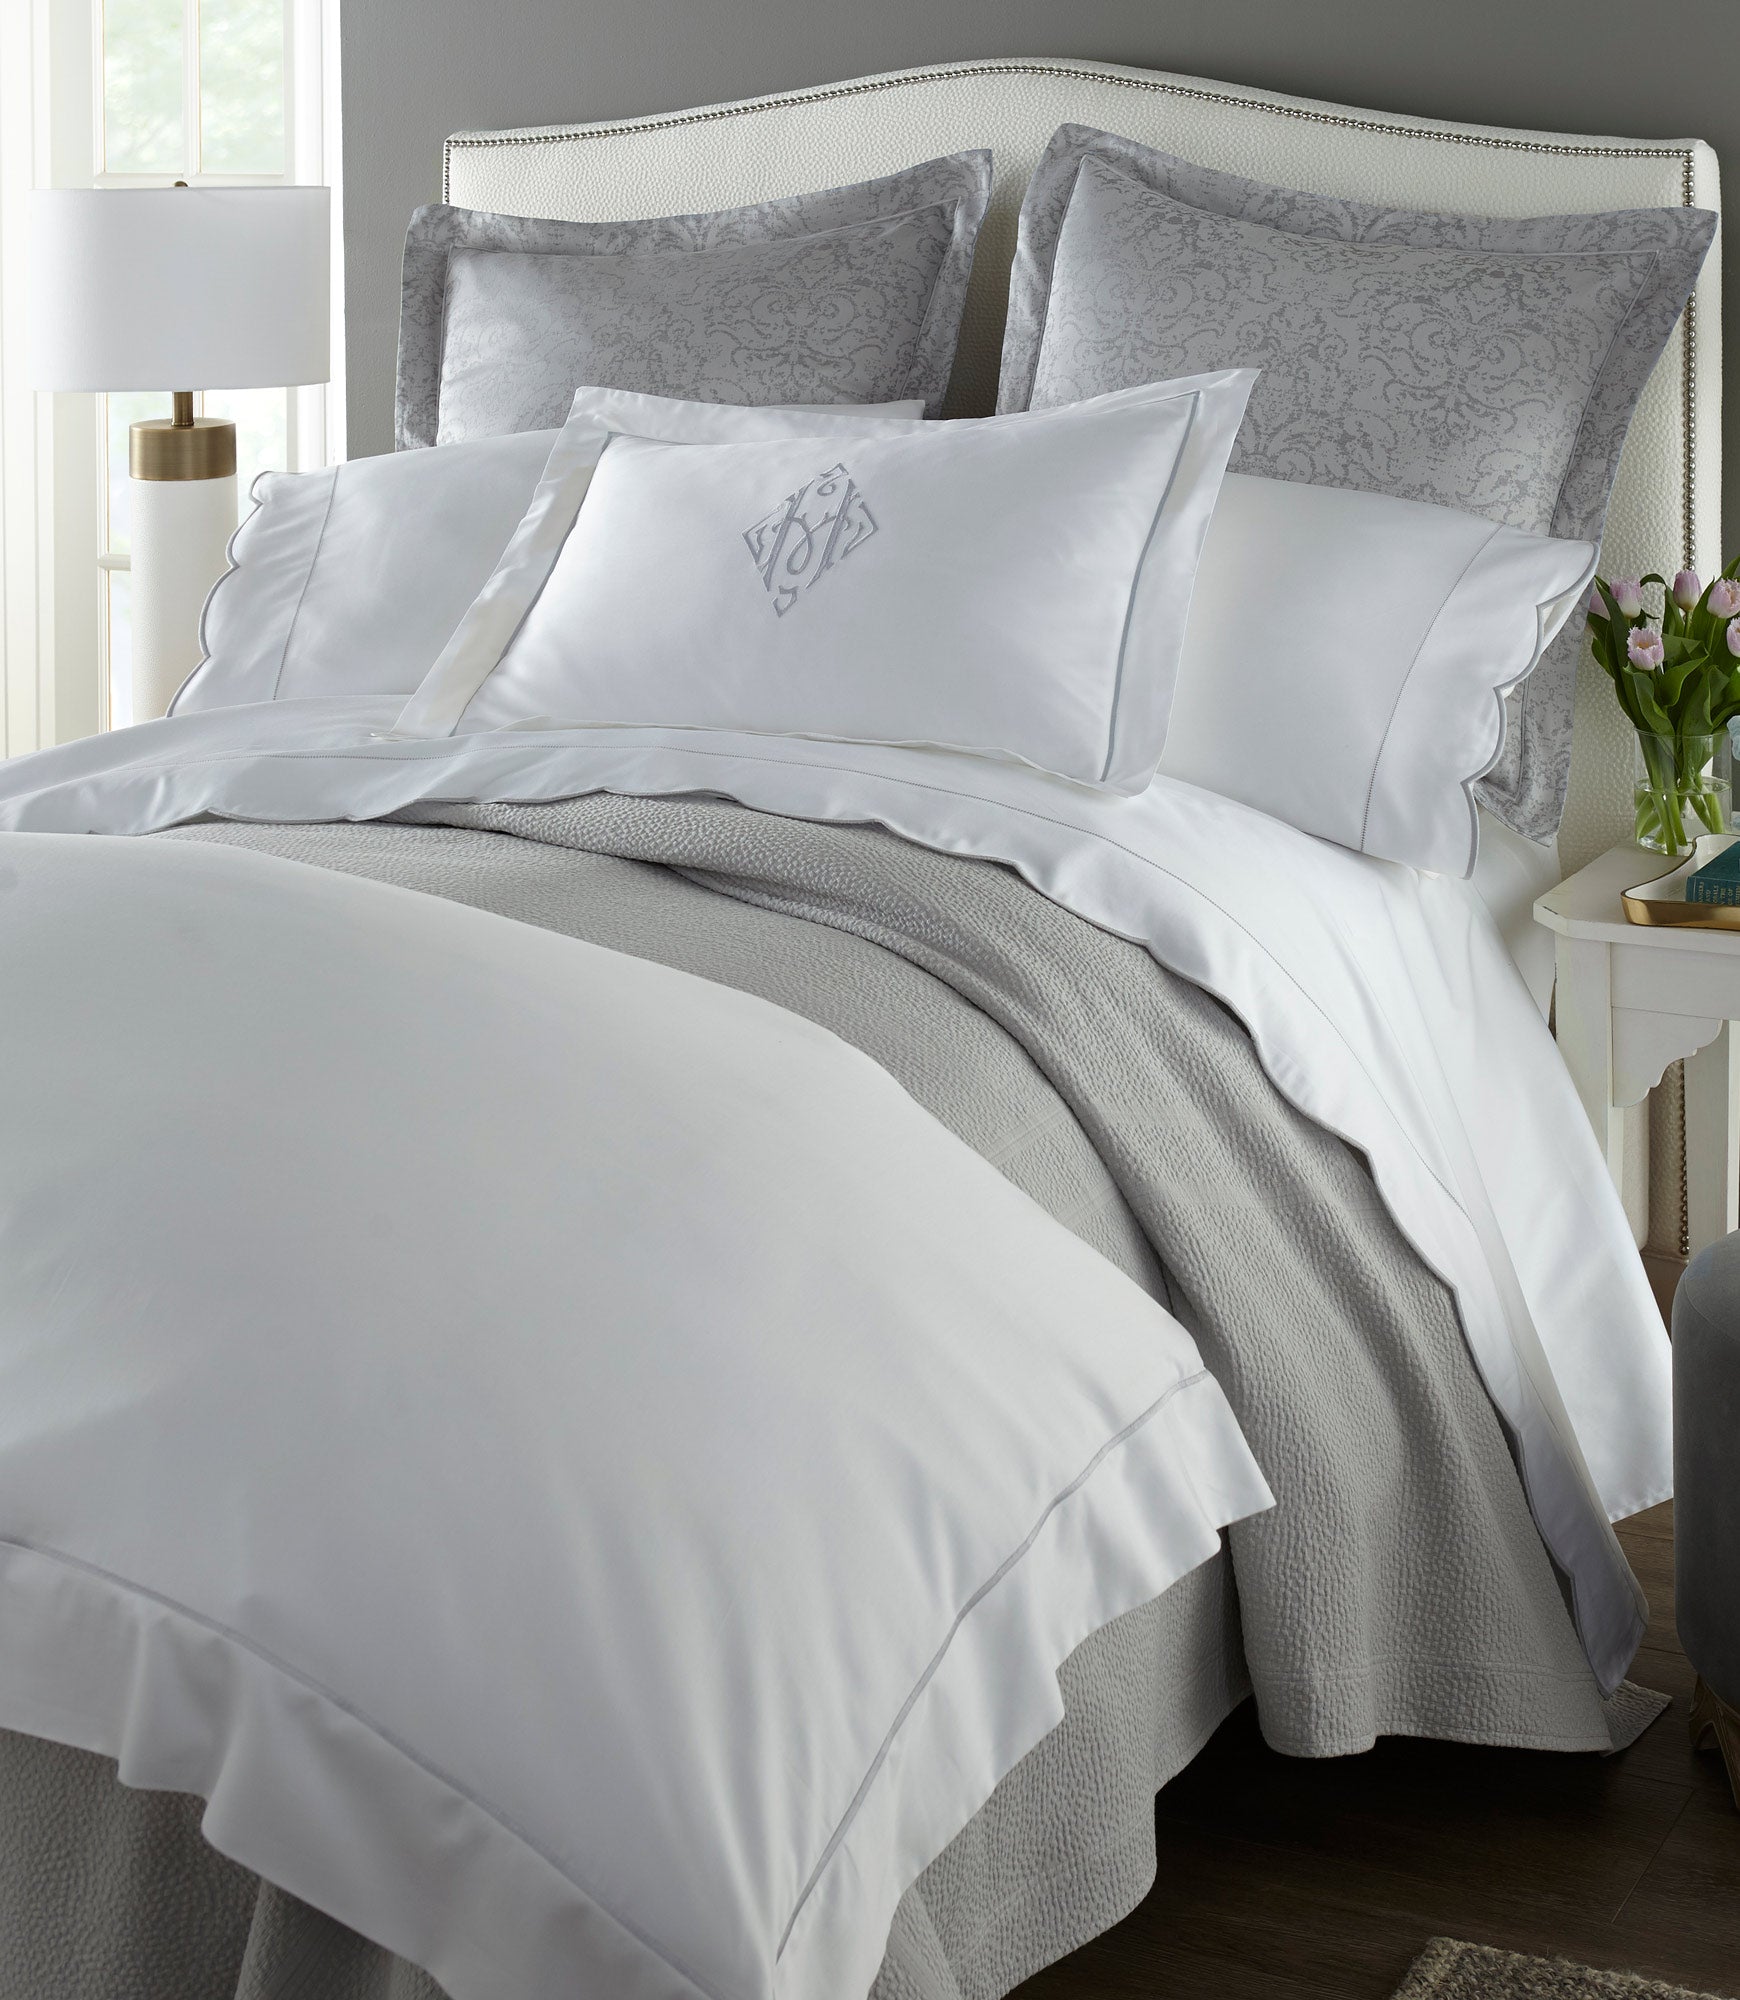 Boutique Percale Duvet Cover in Mist in a Bedroom